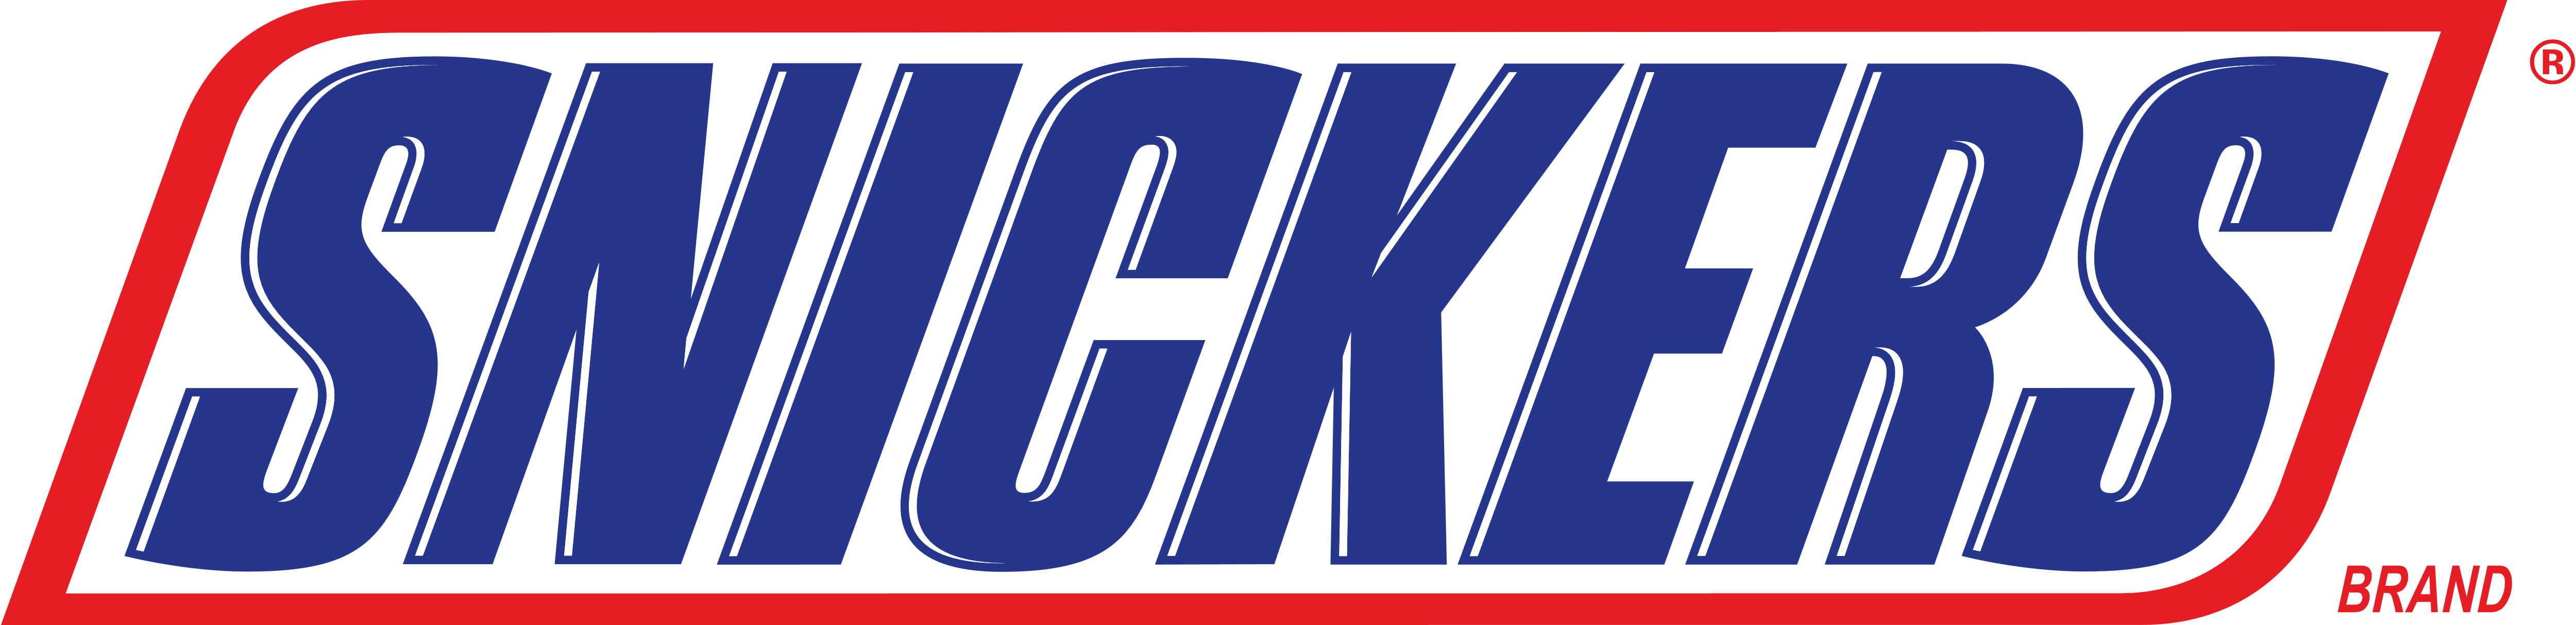 Famous Candy Logo - Snickers Logos